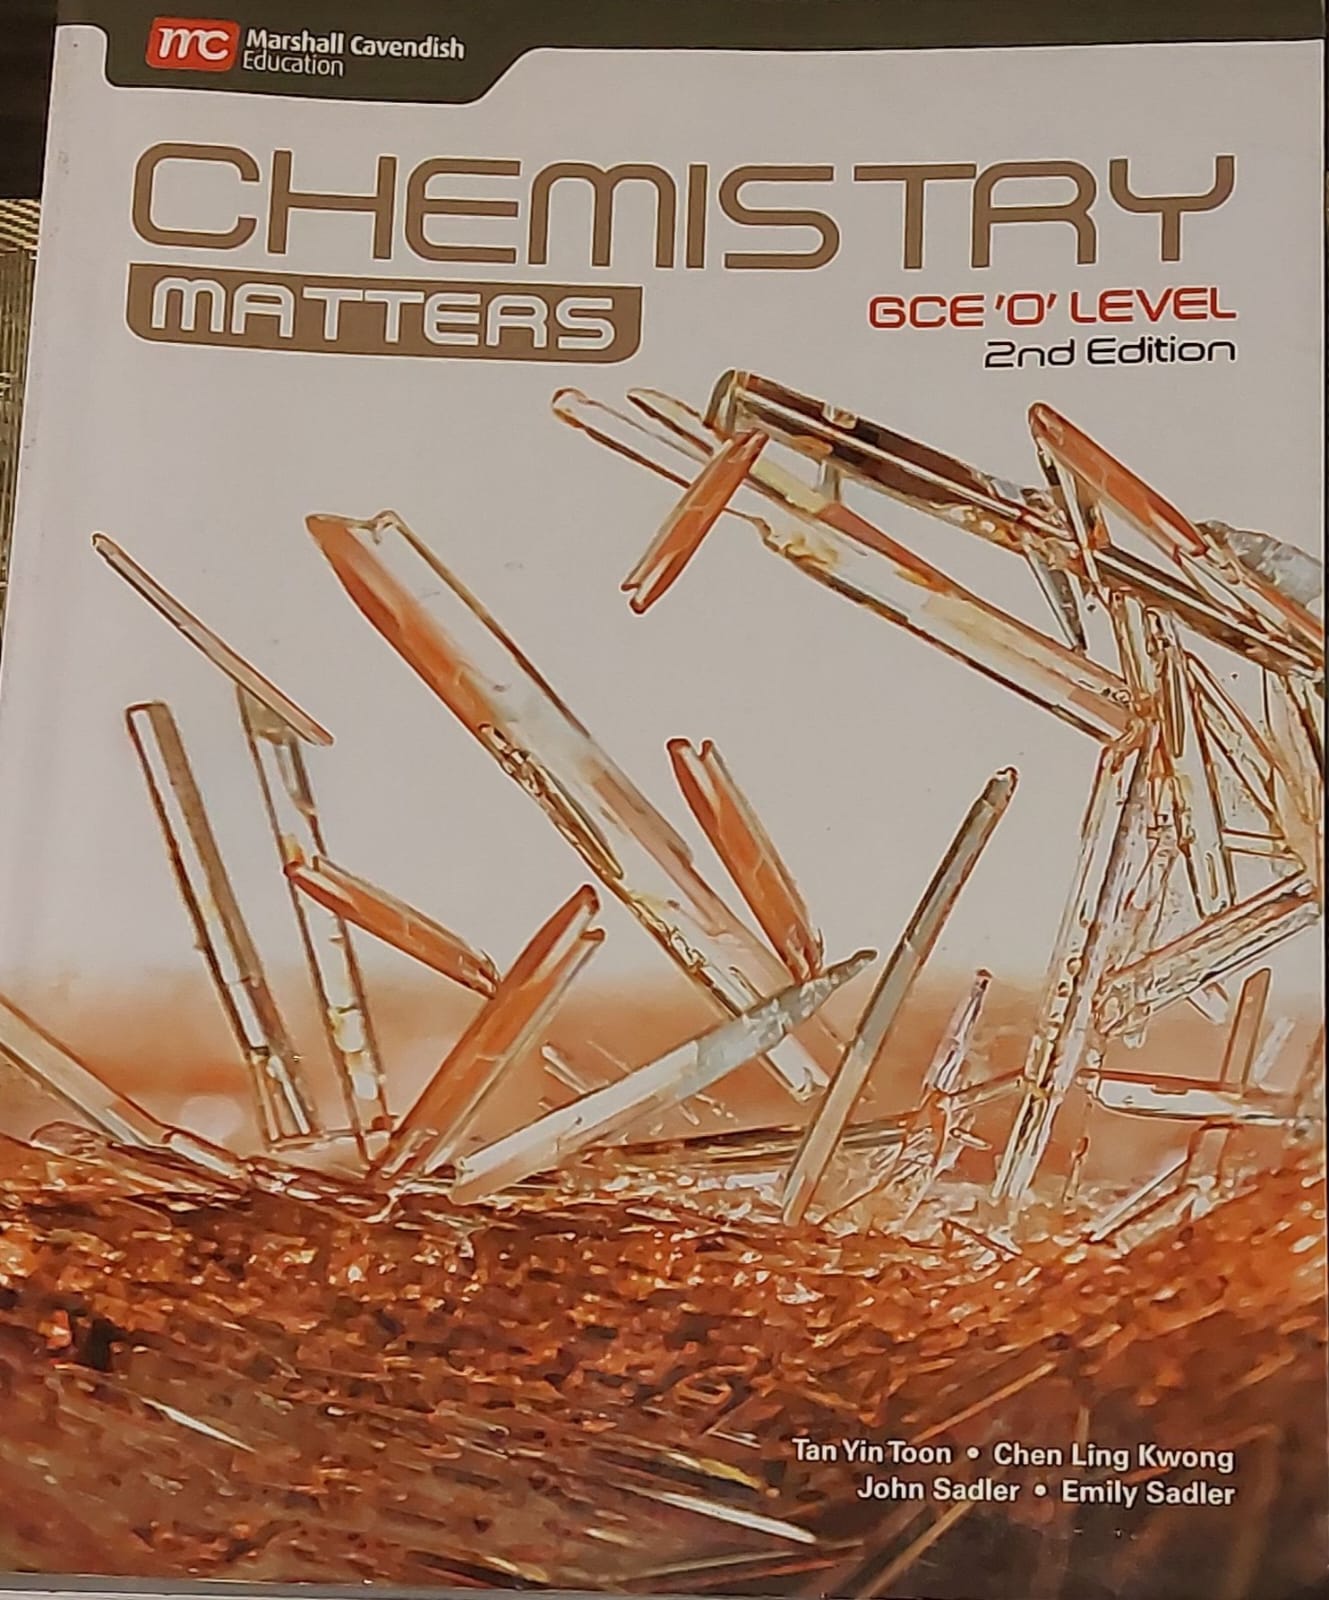 CHEMISTRY MATTERS for O’LEVELS